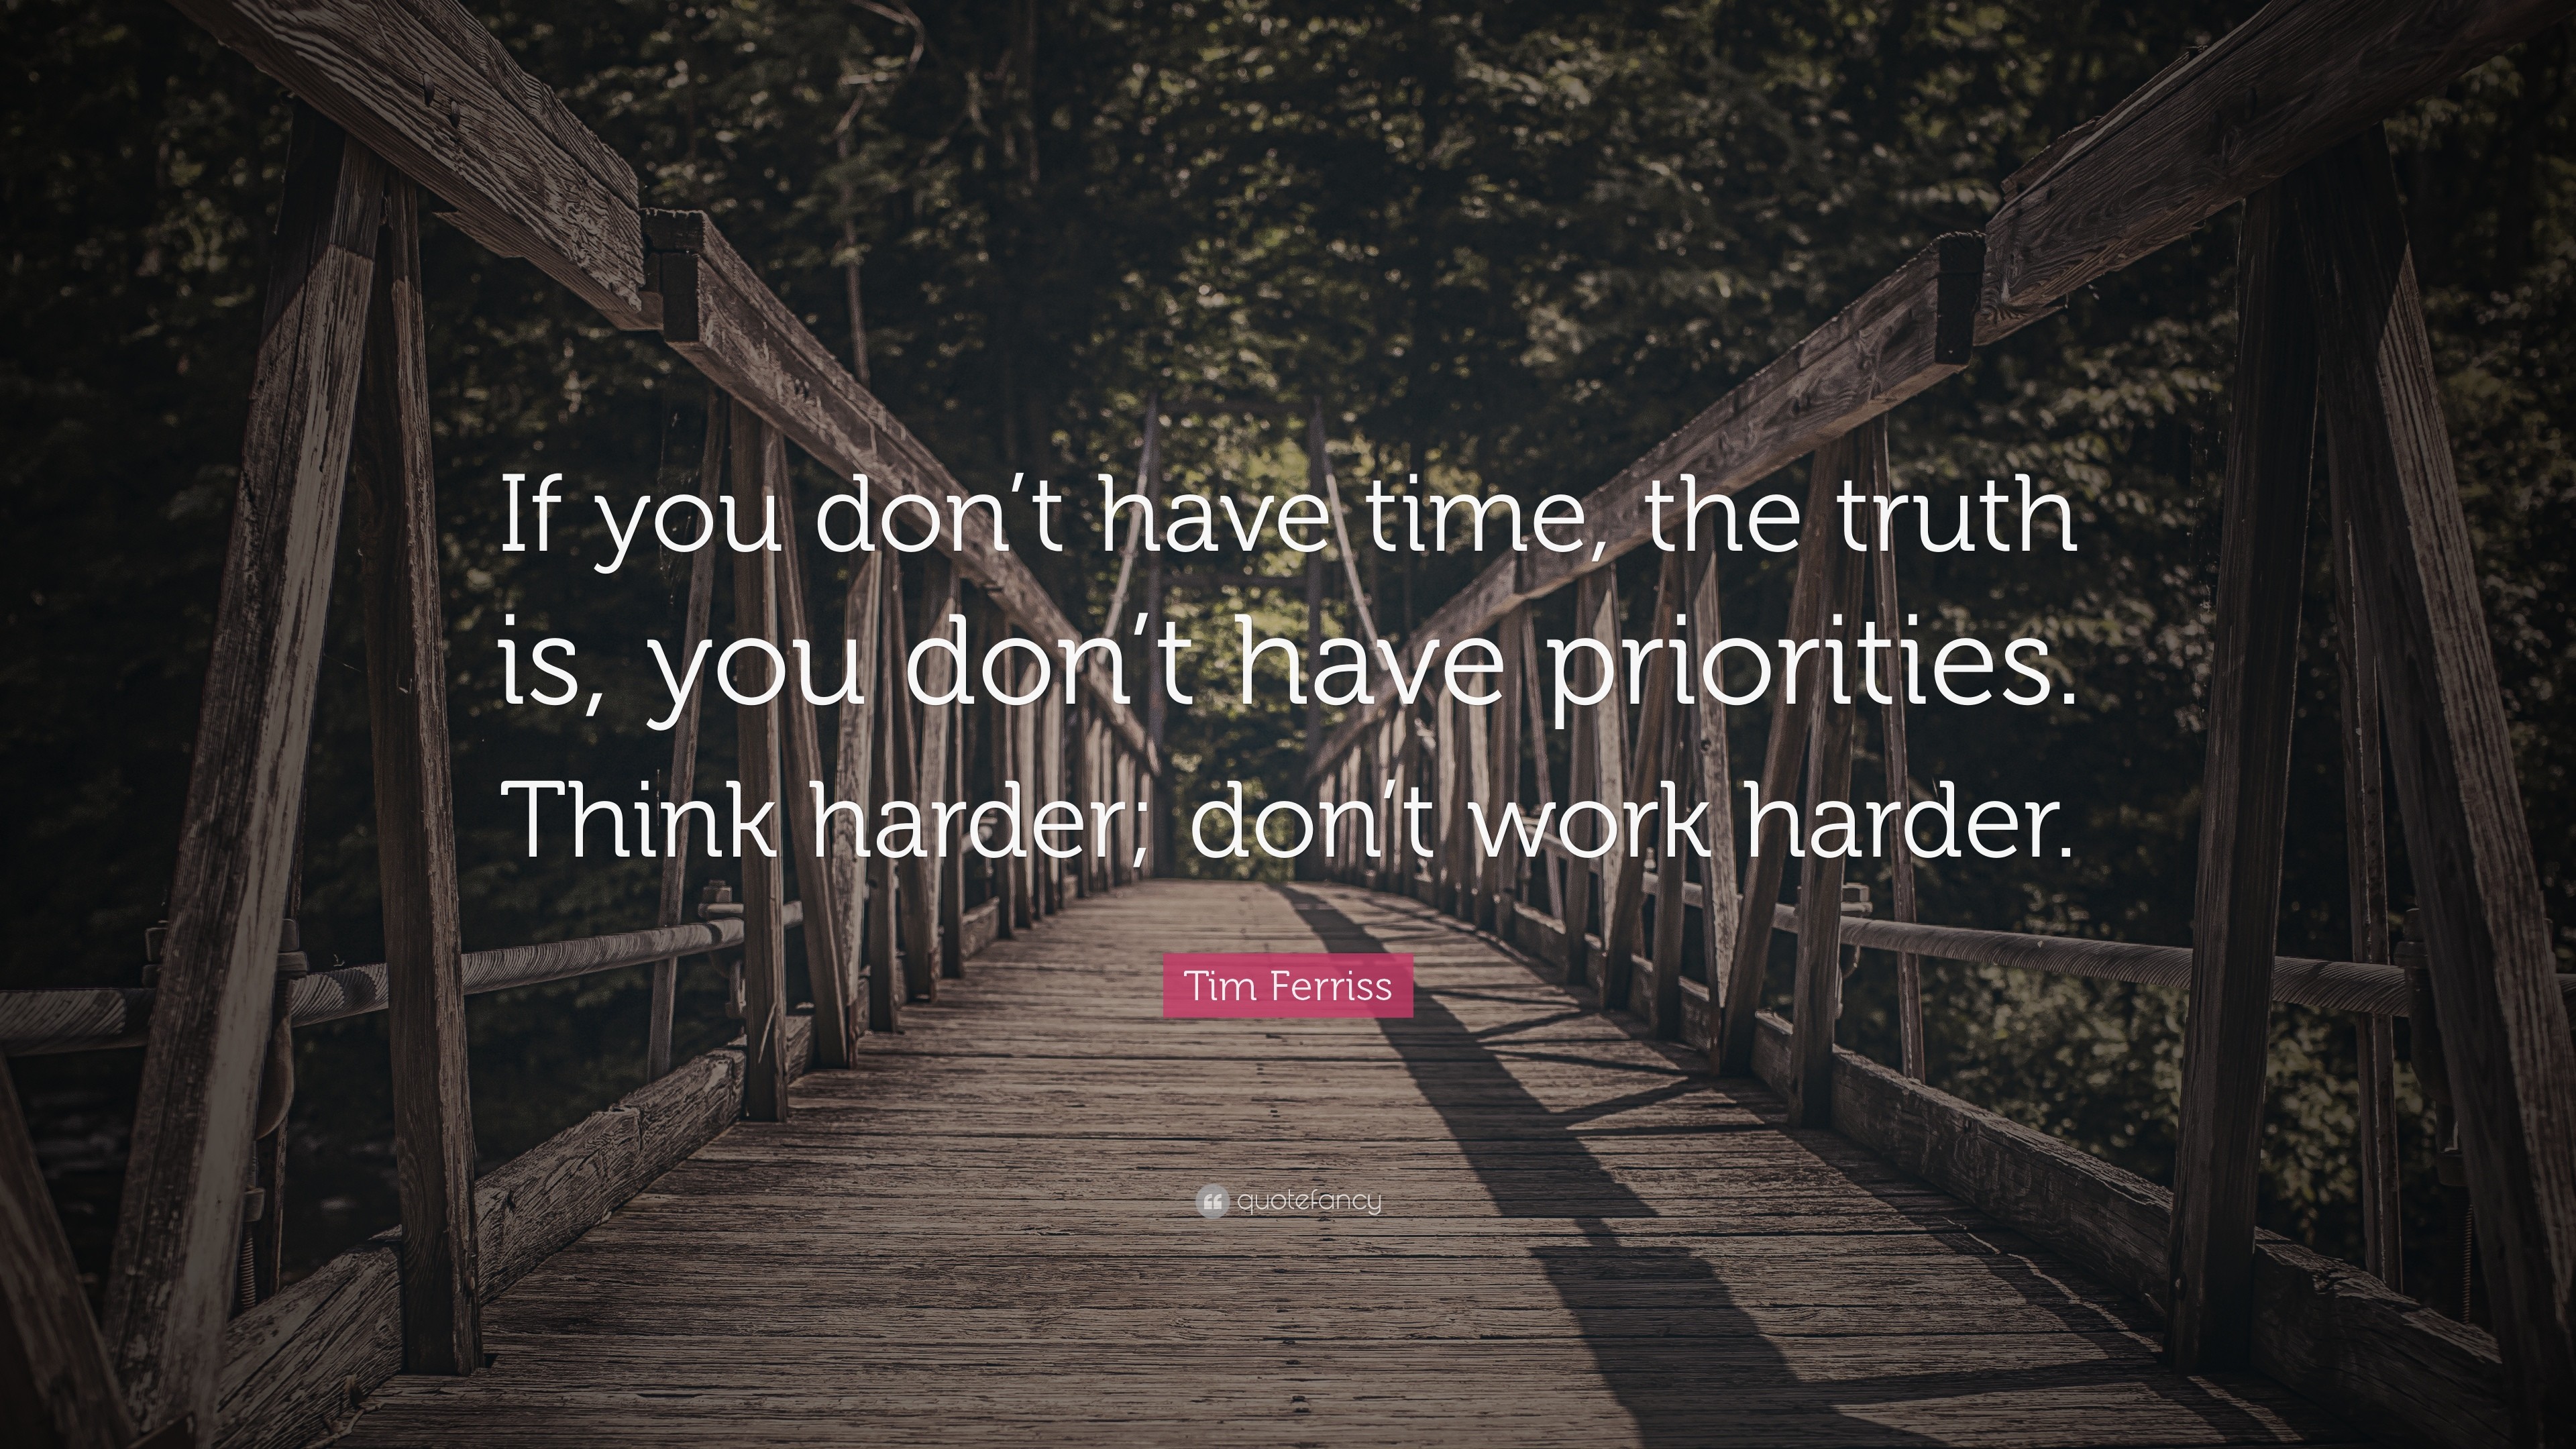 3840x2160 Hard Work Quotes: “If you don't have time, the truth is